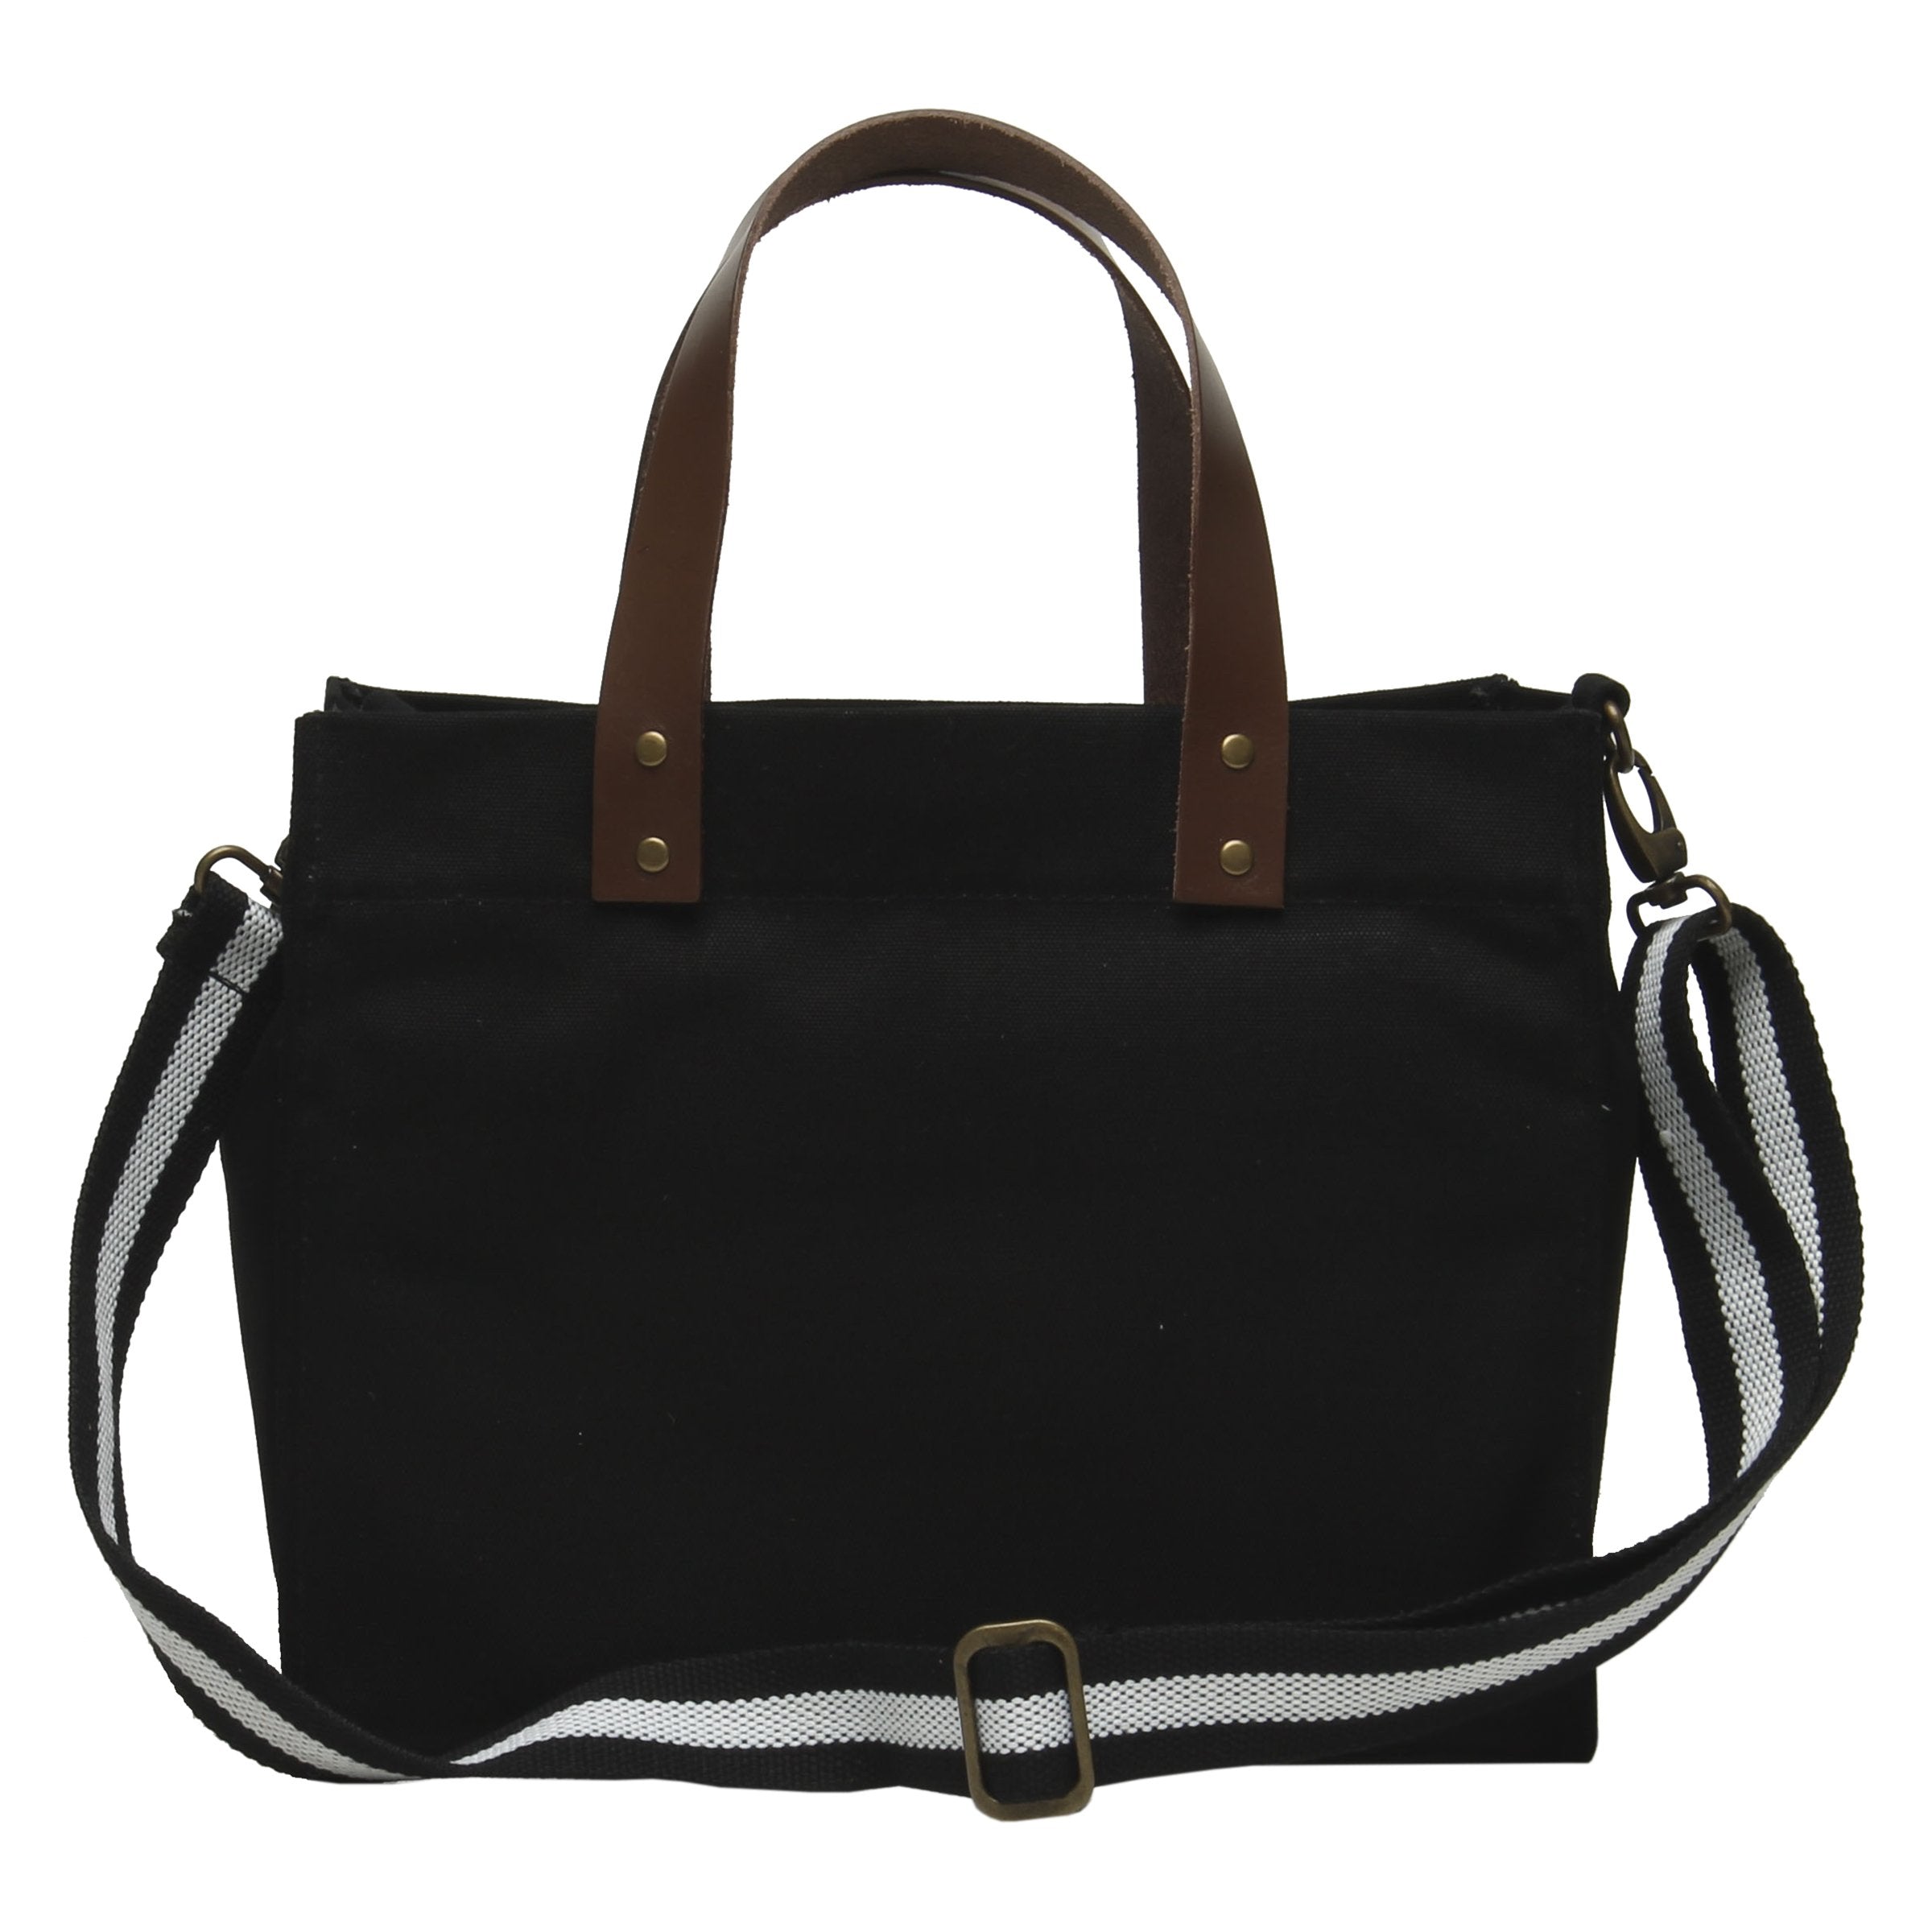 Brooklyn Tote with Cotton Web Straps - Tag&Crew